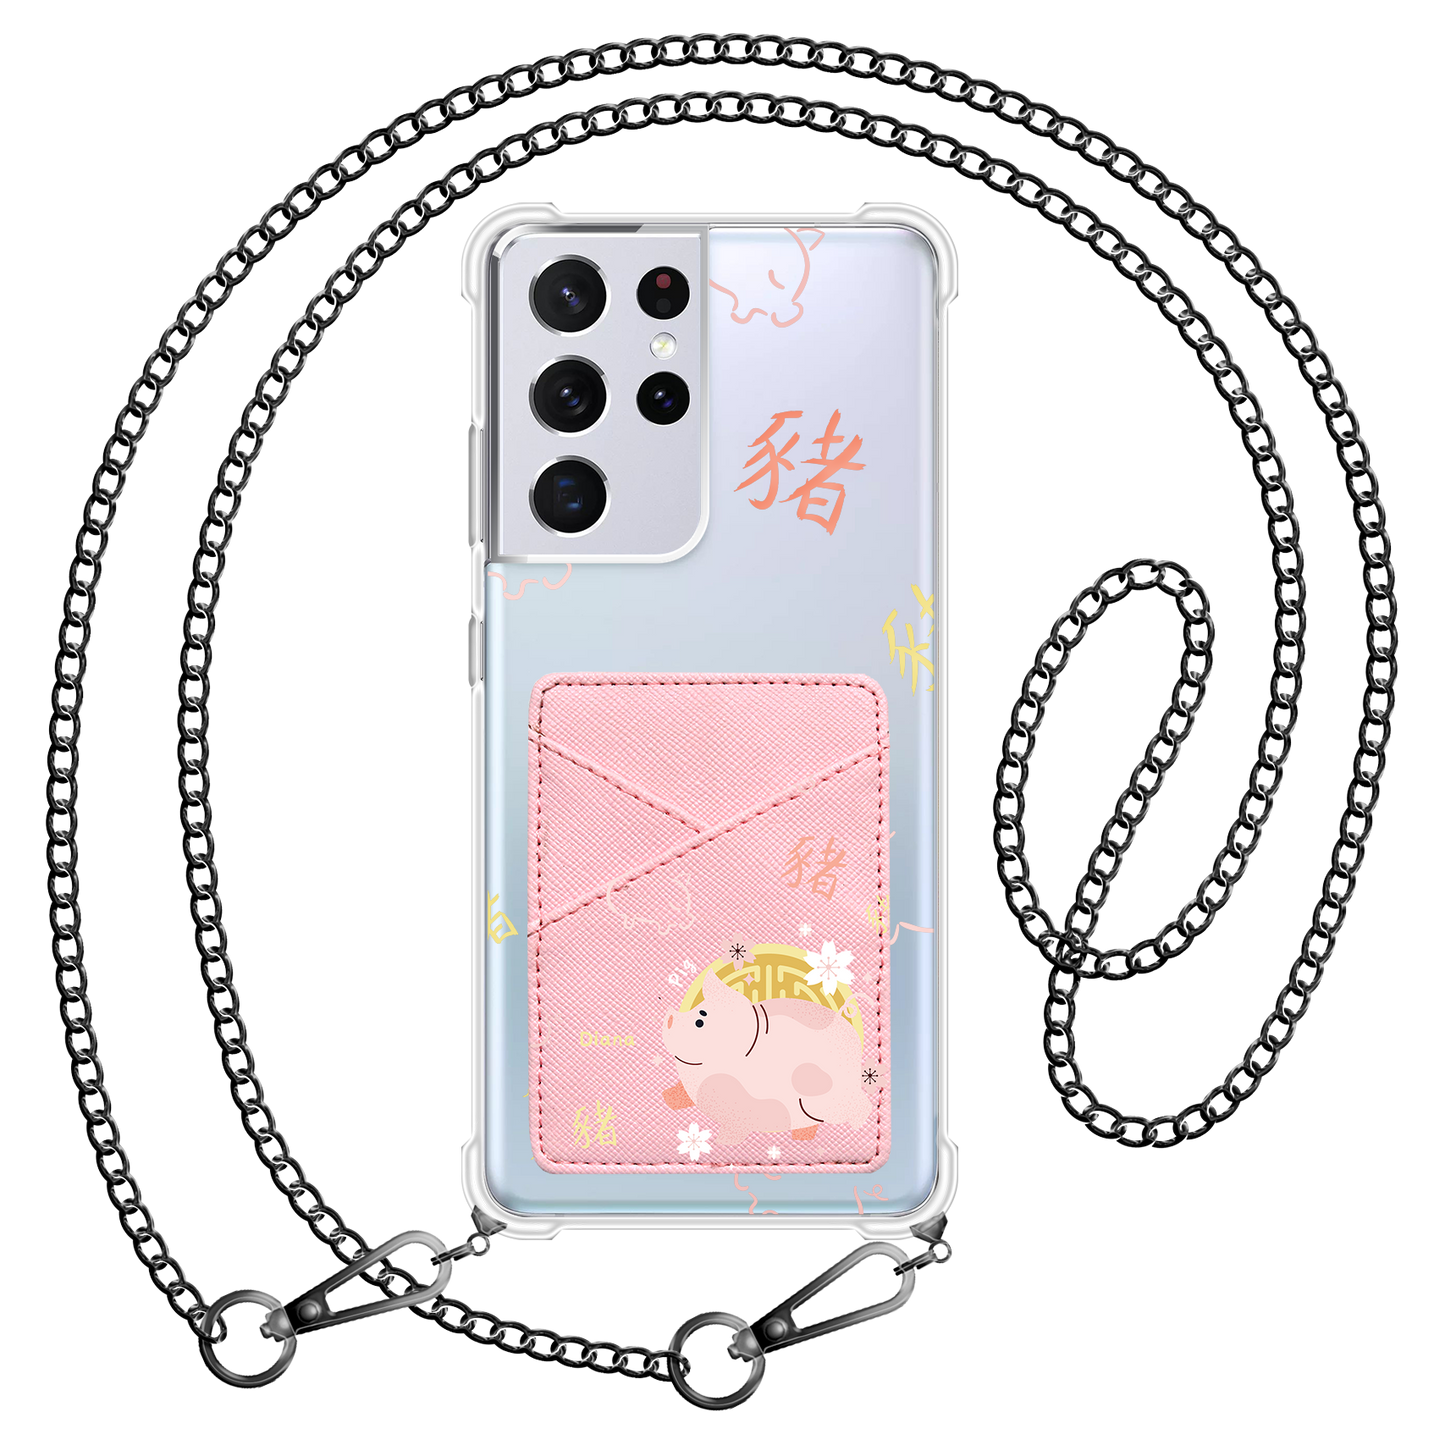 Android Phone Wallet Case - Pig (Chinese Zodiac / Shio)